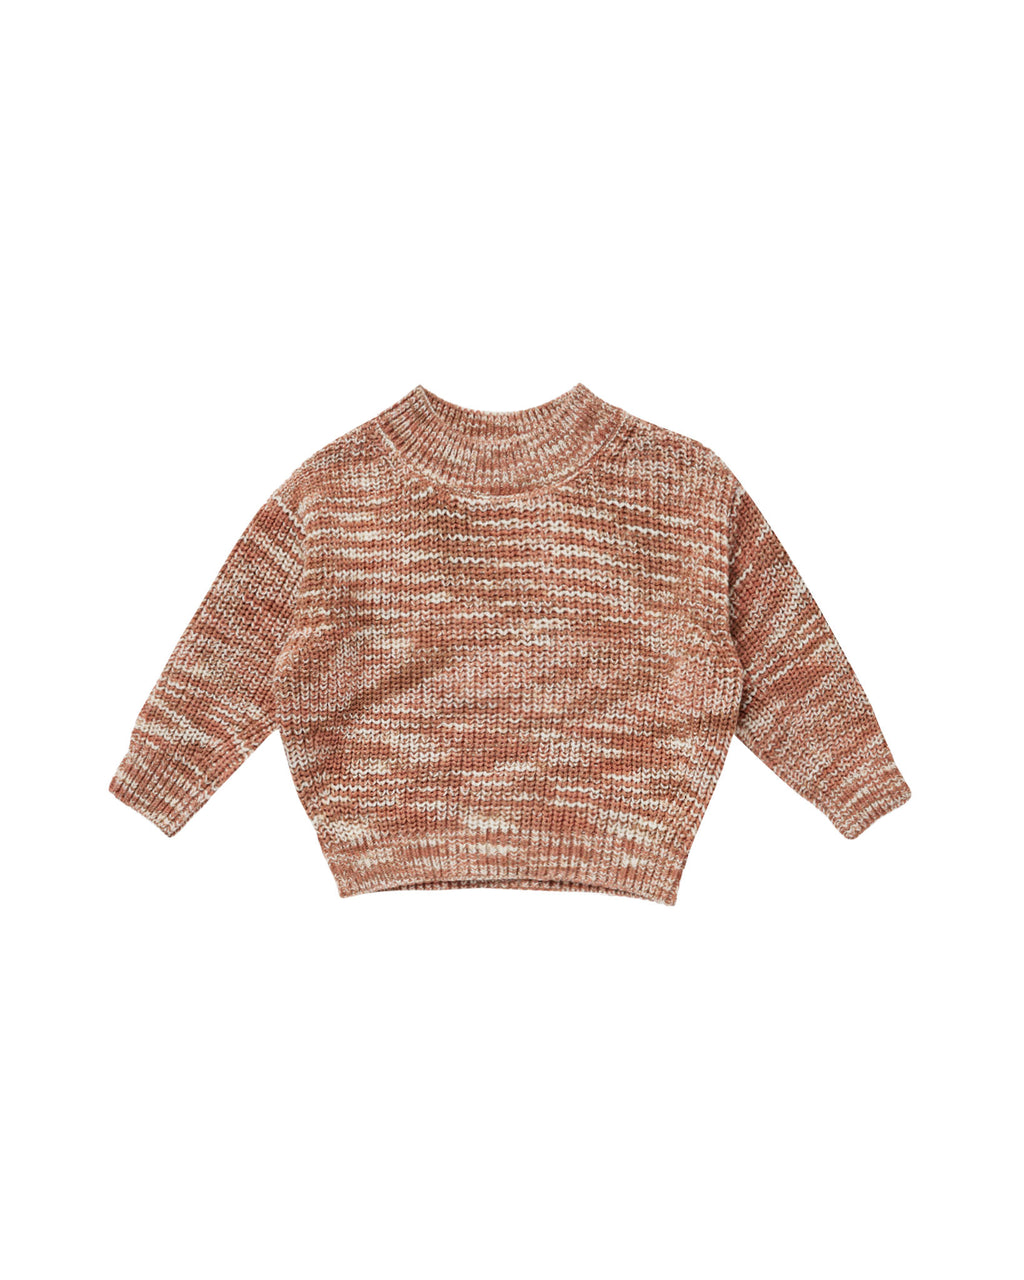 Rylee + Cru Relaxed Knit Sweater - Heathered Spice